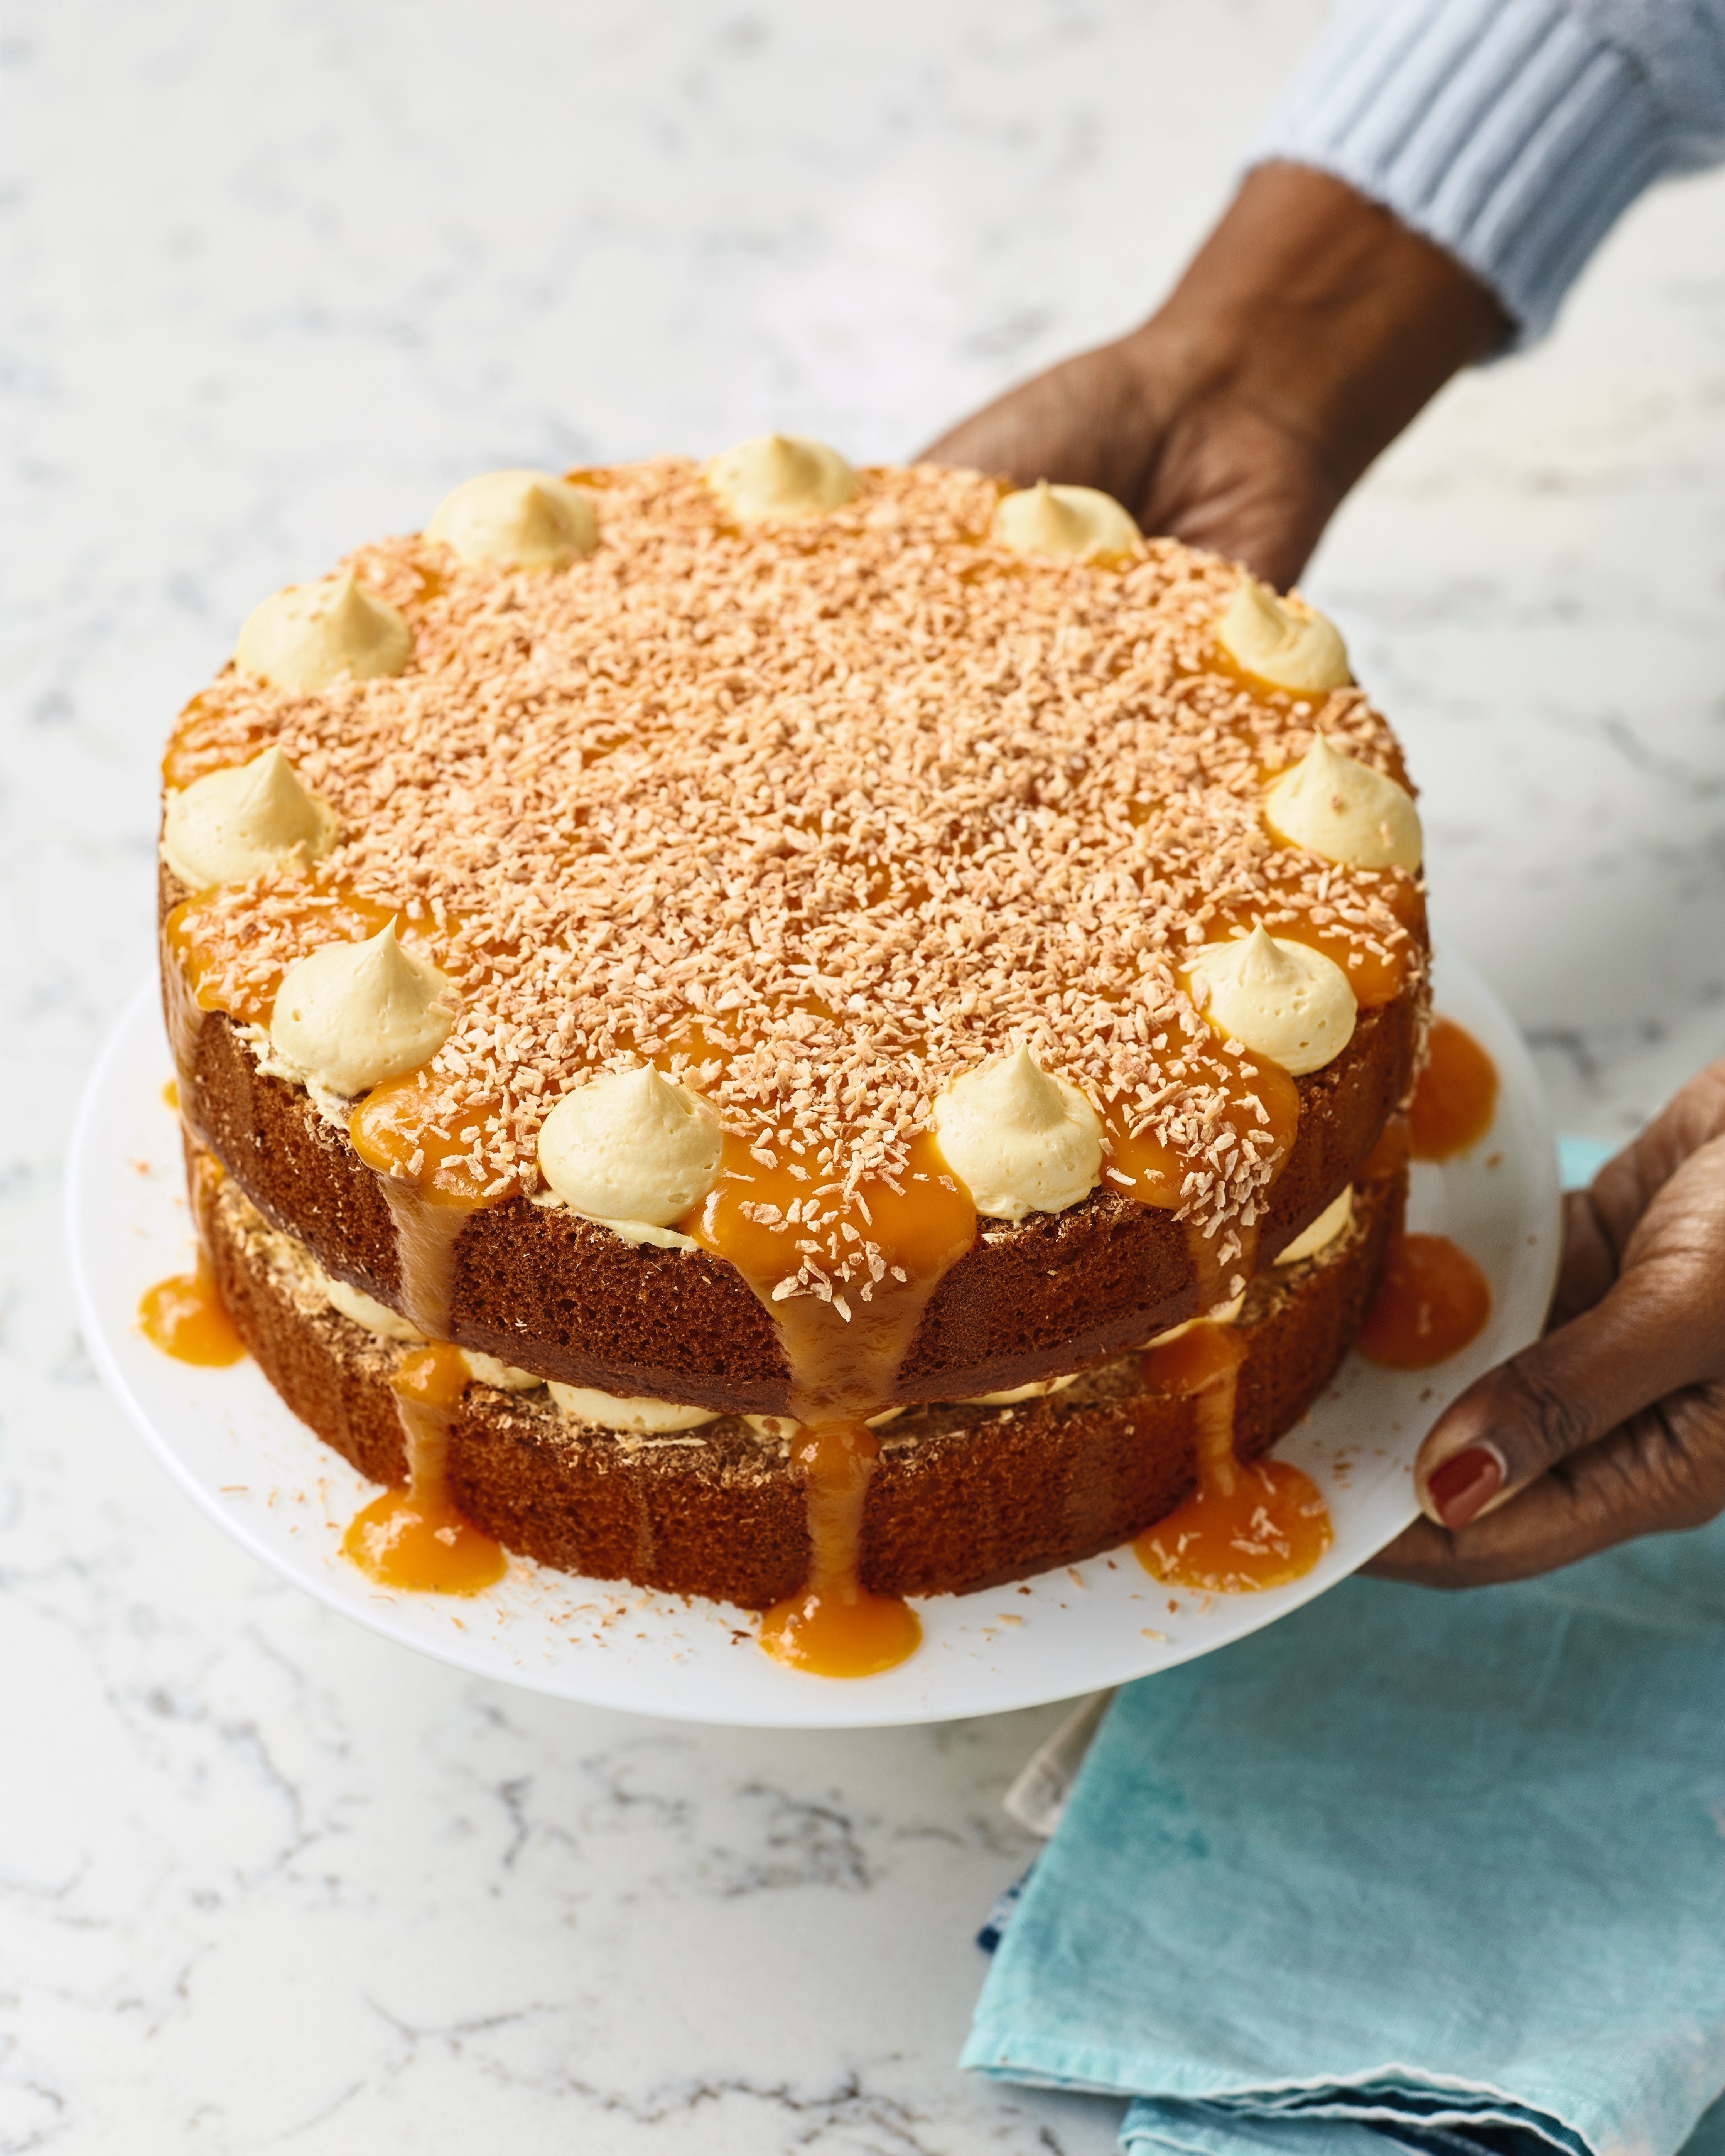 Traditional Bangladeshi flavours – in a cake!